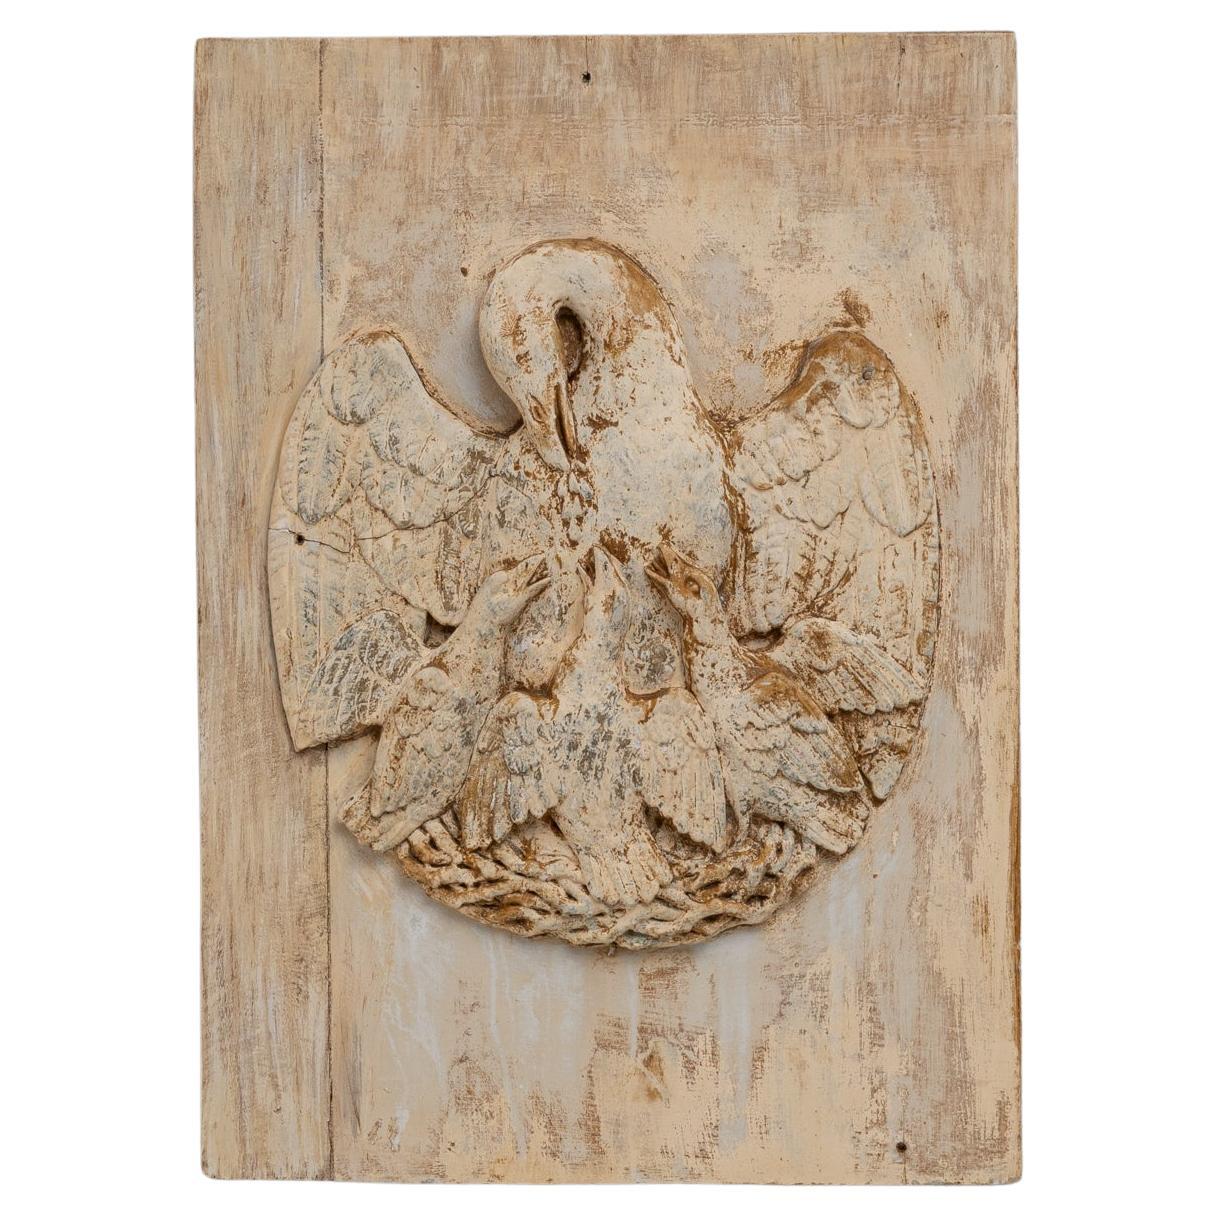 Wooden Bird Wall Decoration For Sale